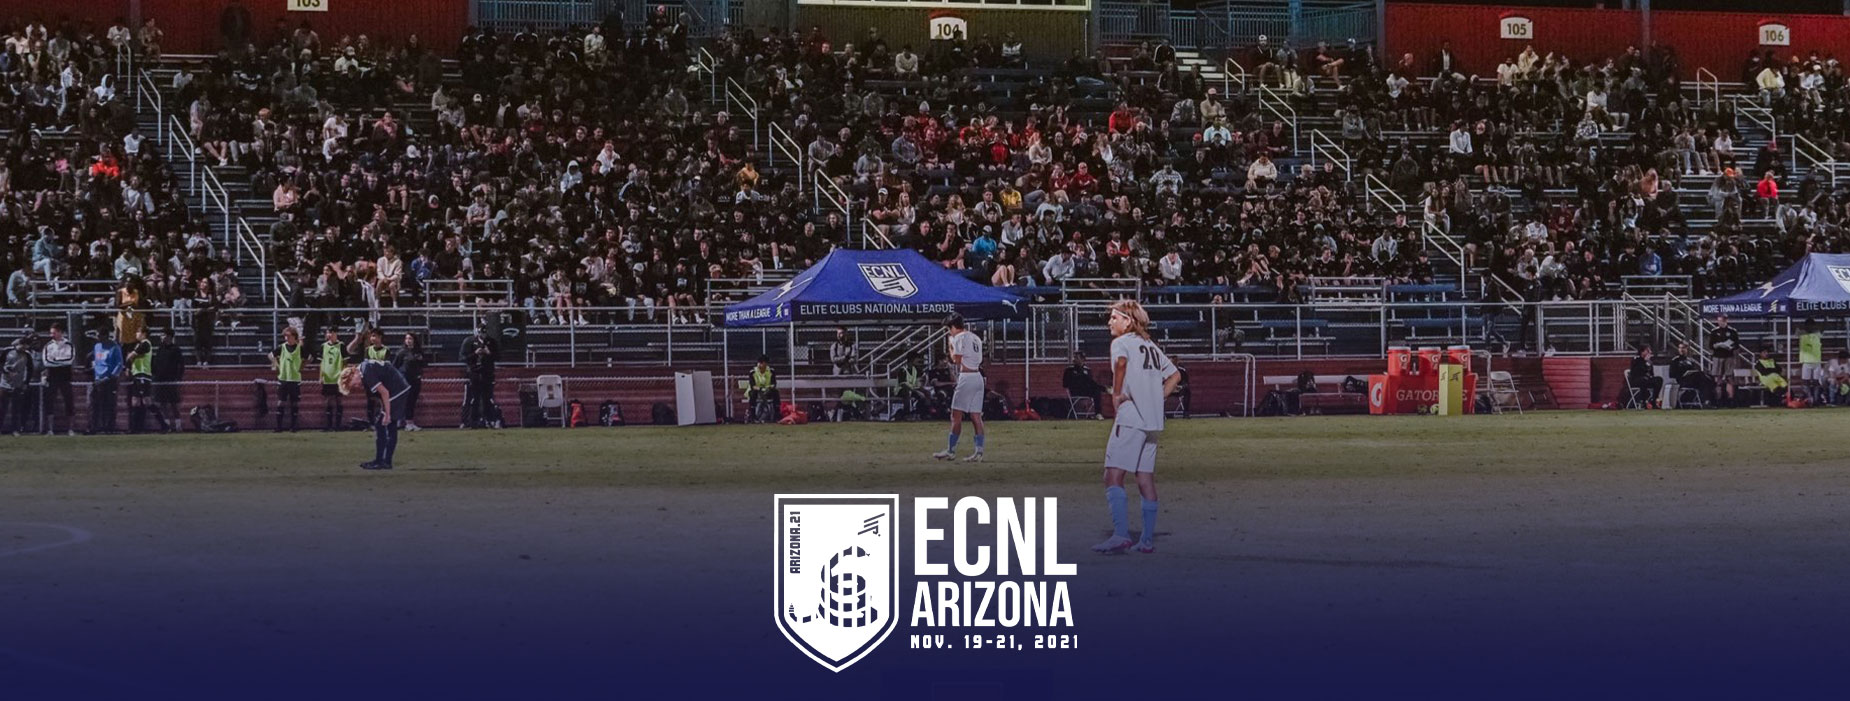 Players Dazzle in ECNL Selection game